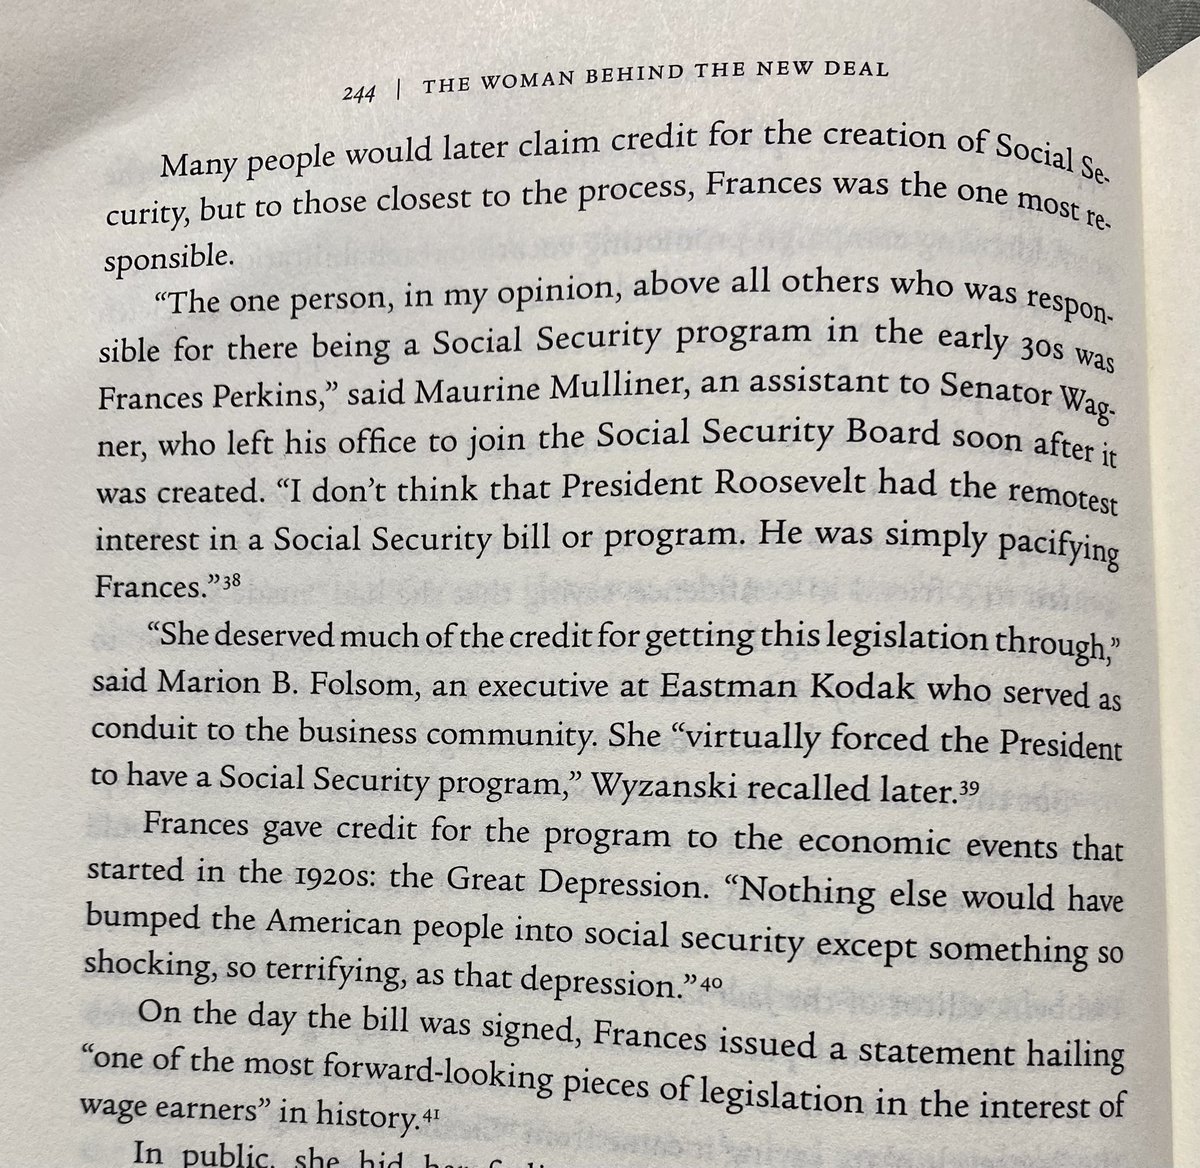 wow, just finished chapter on the creation of unemployment insurance, Social Security, and some other safety net programs in 1935z. too many screenshots to share. will say Frances Perkins is a badass and we must do a much better job and strengthen the safer net she championed.